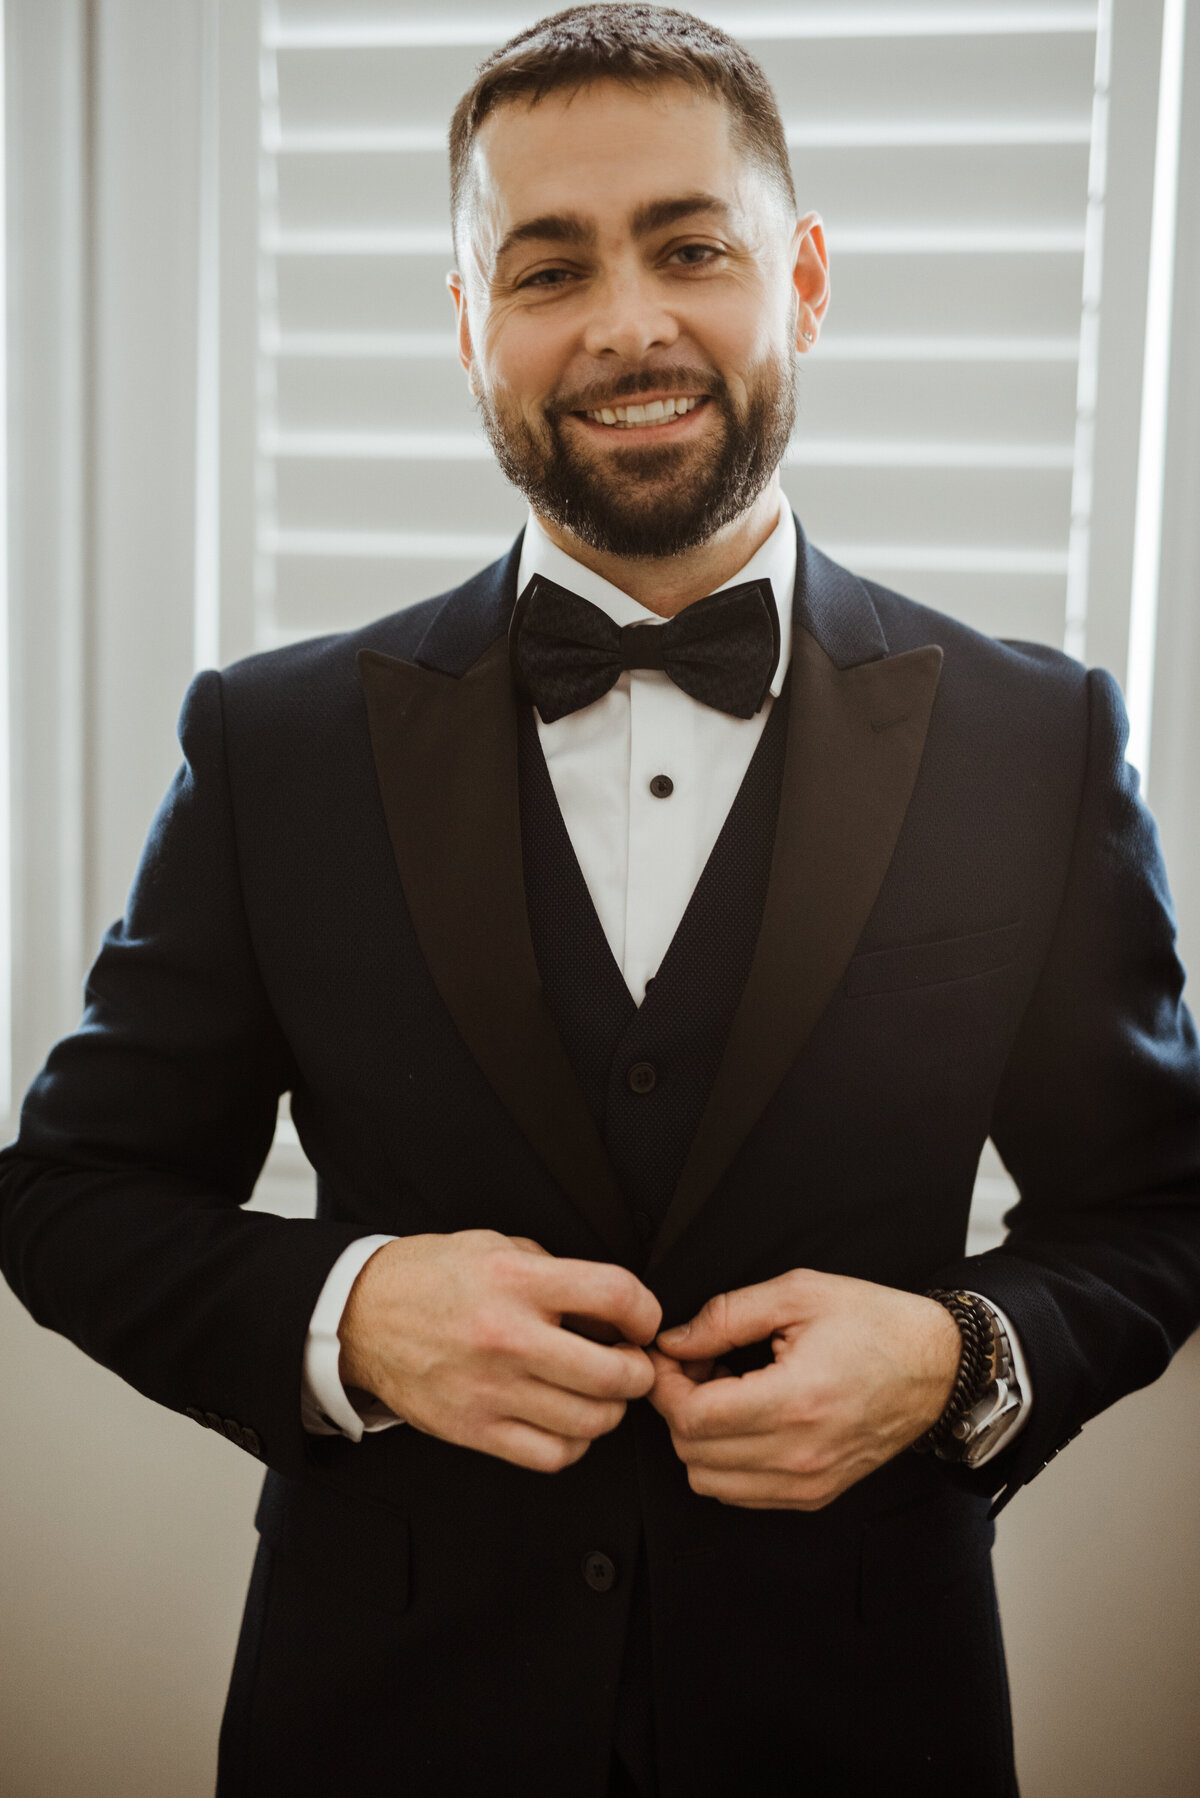 B-markham-home-covid-pandemic-diy-love-is-not-cancelled-wedding-photography-groom-son-getting-ready-09